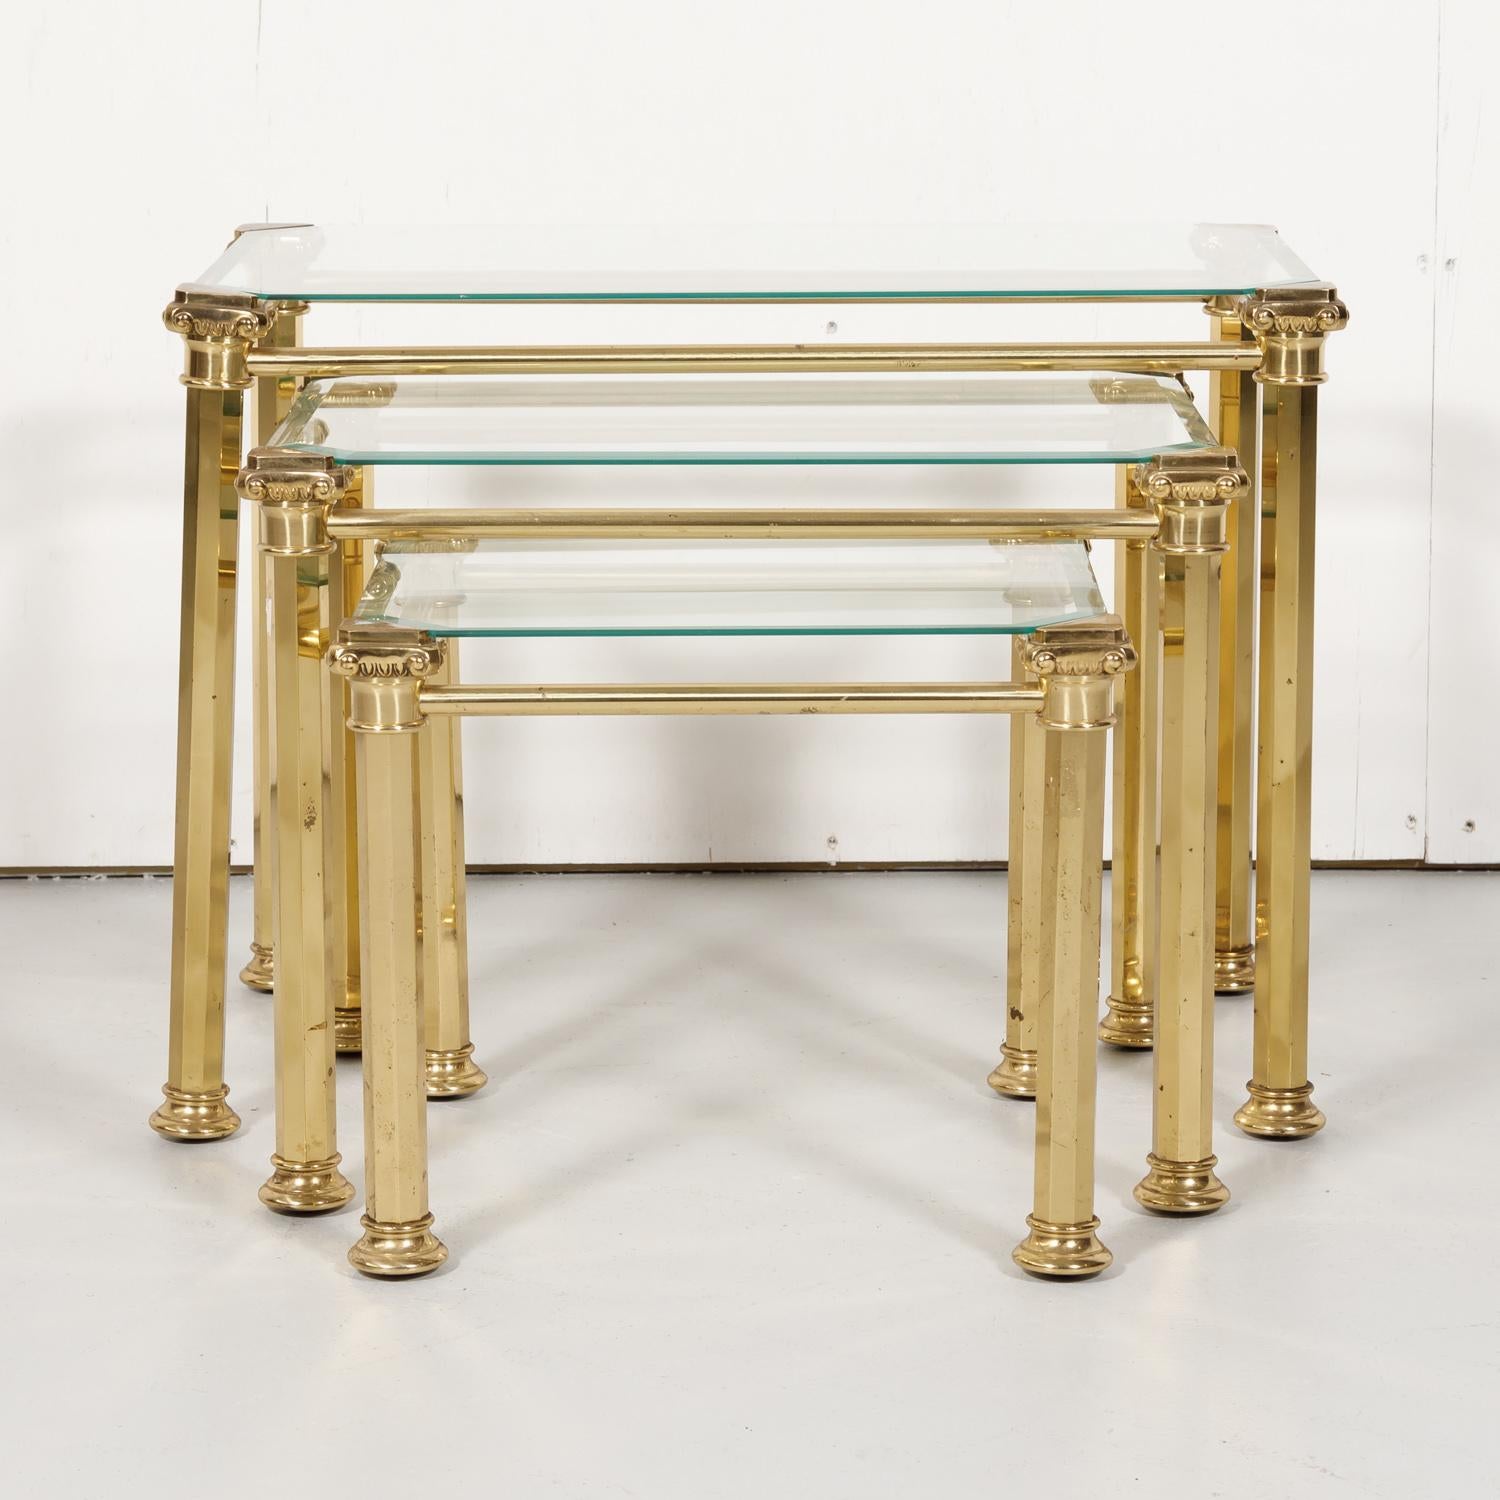 Set of Three French Mid-Century Modern Brass and Glass Nesting Tables by Maison 2